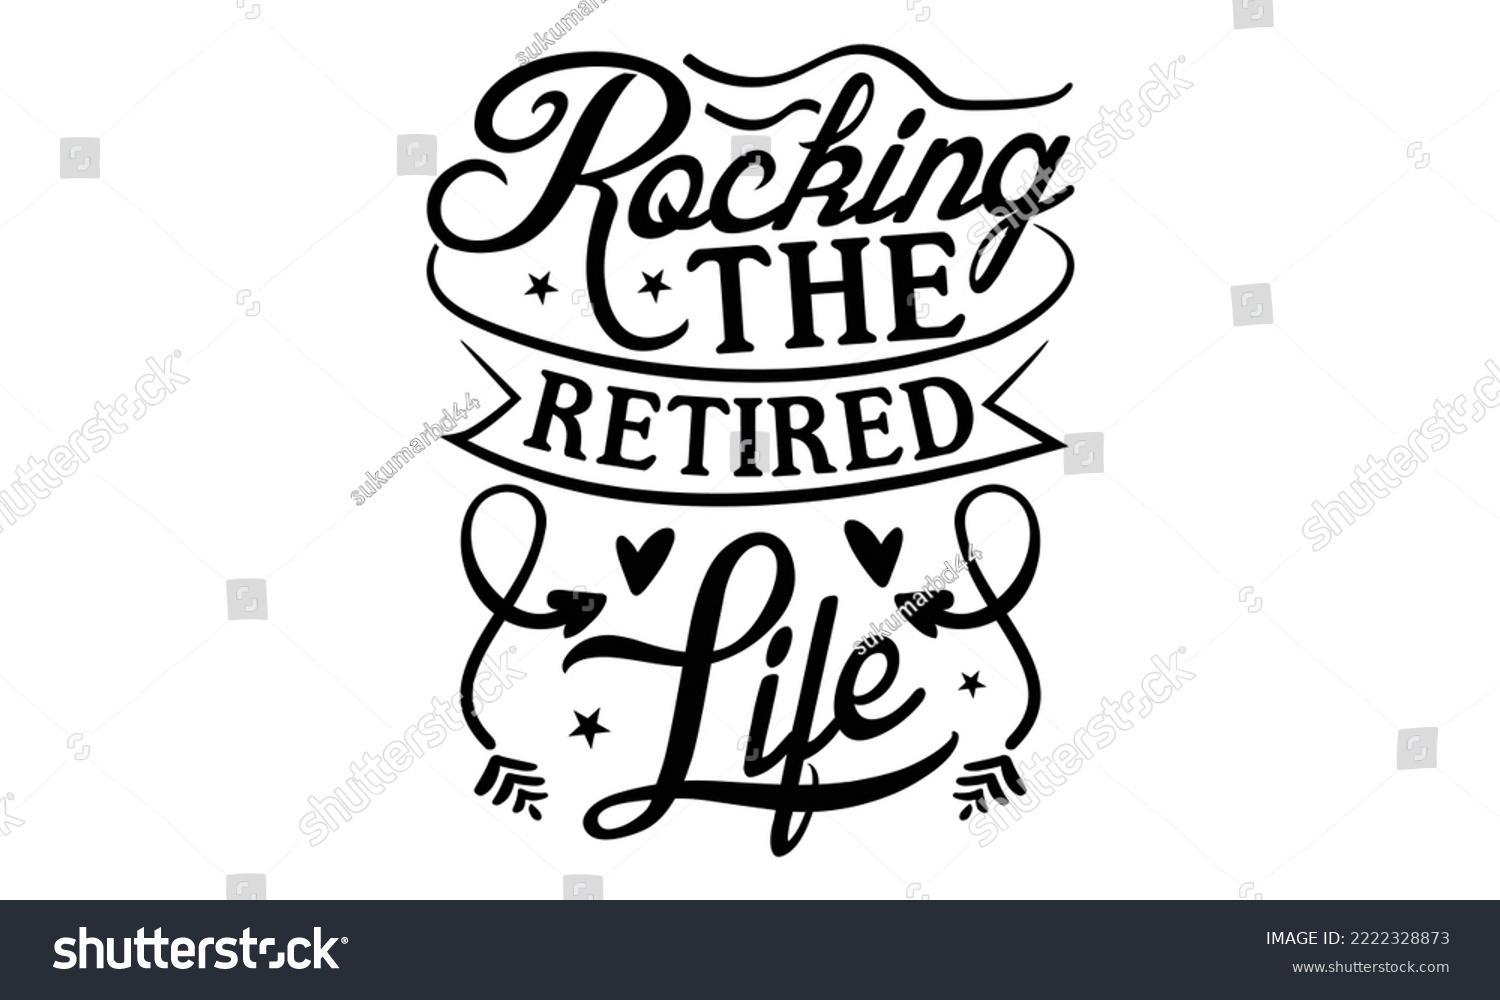 SVG of Rocking The Retired Life - Retirement SVG Design, Hand drawn lettering phrase isolated on white background, typography t shirt design, eps, Files for Cutting svg